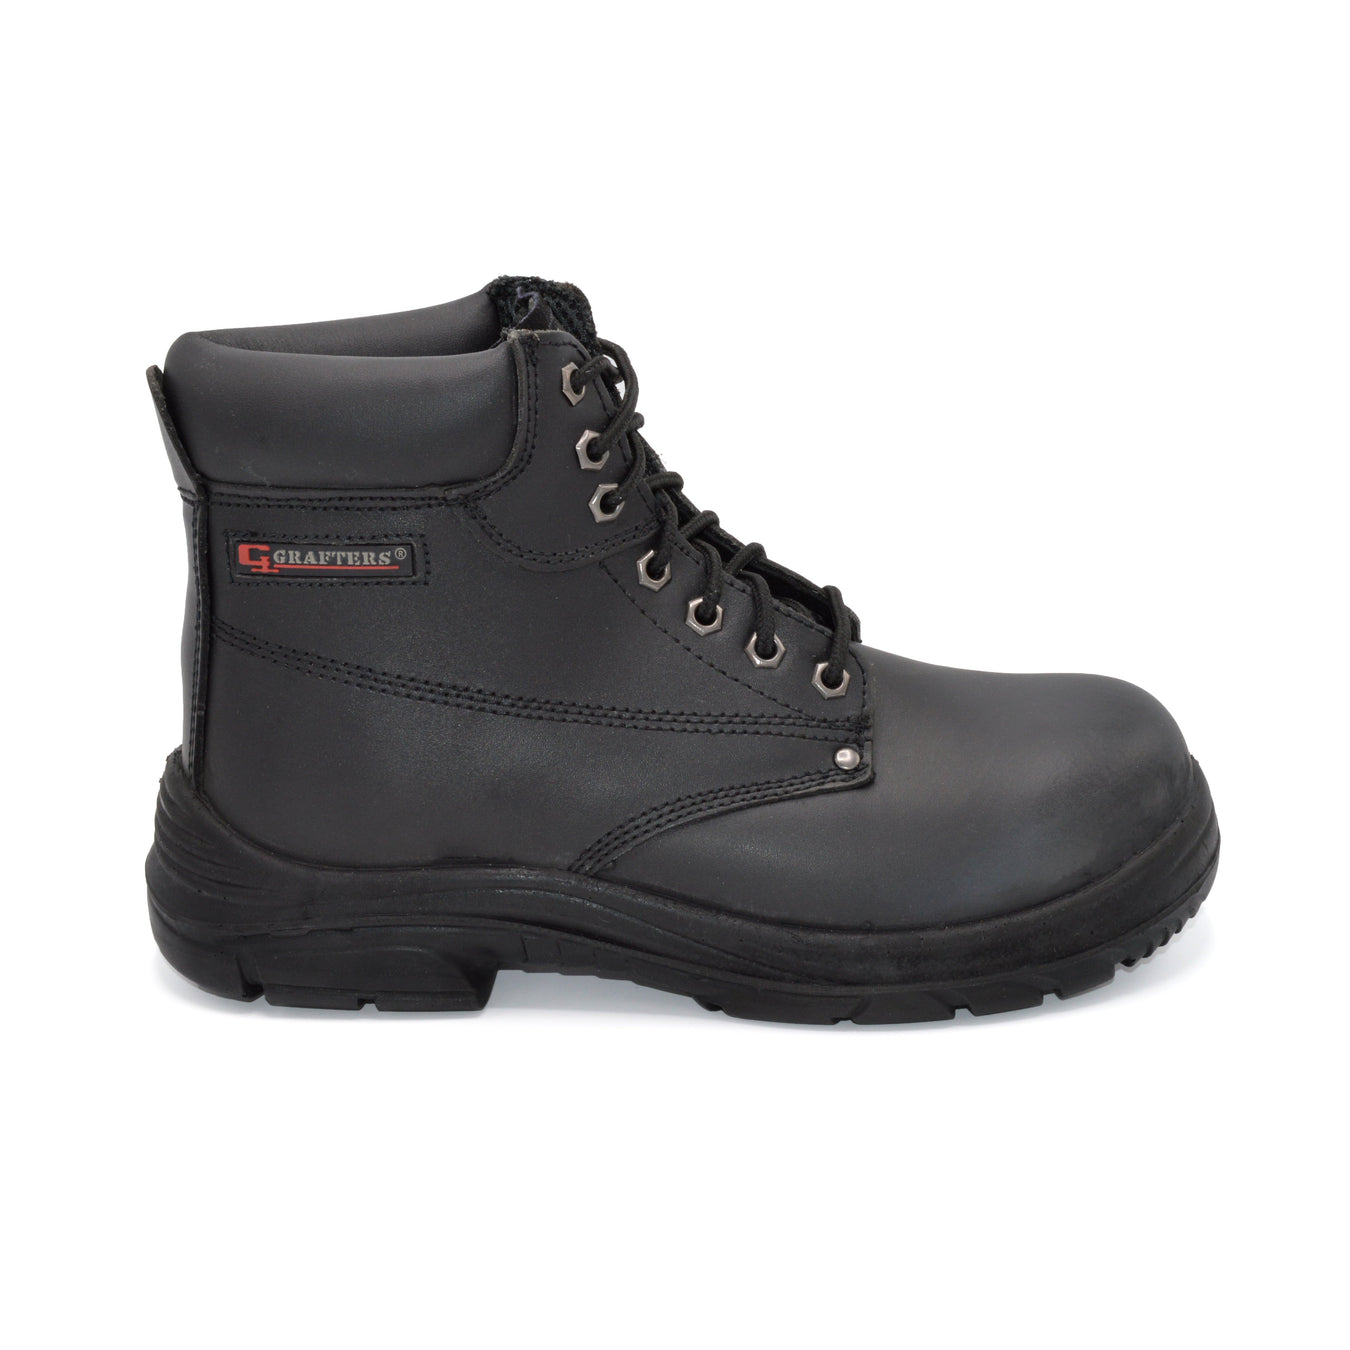 Mens Wide Fit Safety Boots For Work. Extra Wide Available.